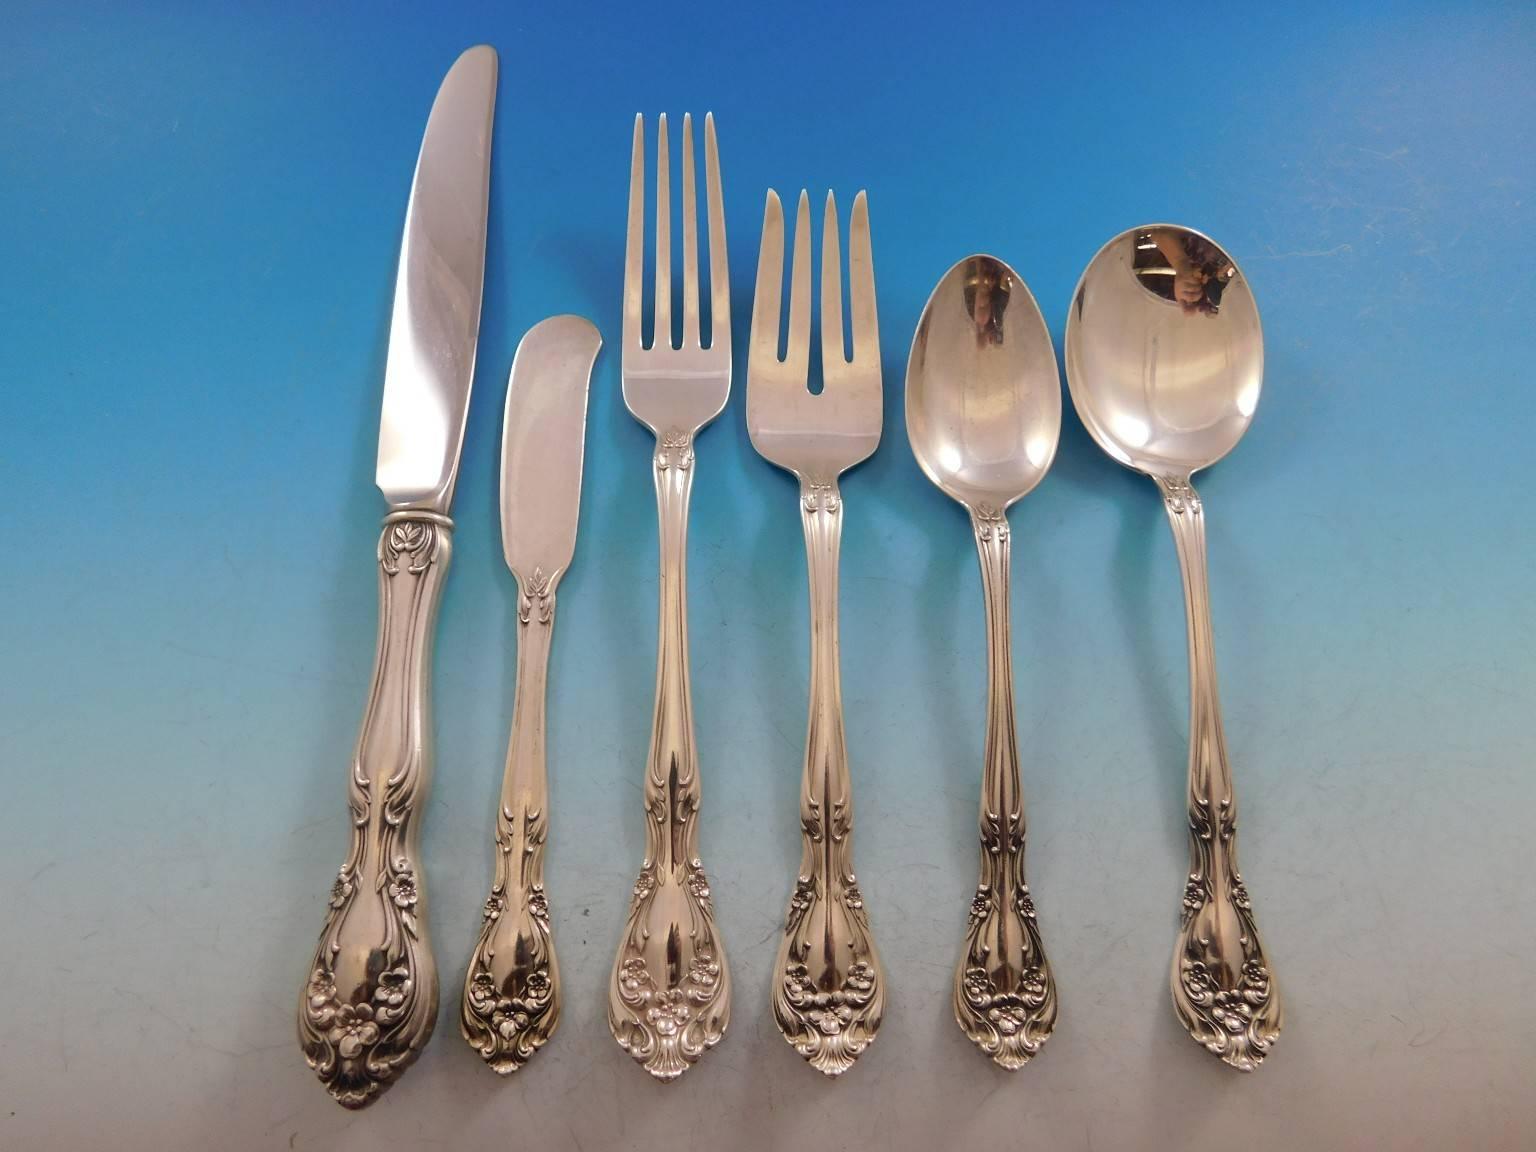 Monumental Chateau Rose by Alvin sterling silver Flatware set, 121 pieces. This set includes:

18 Knives, 8 7/8